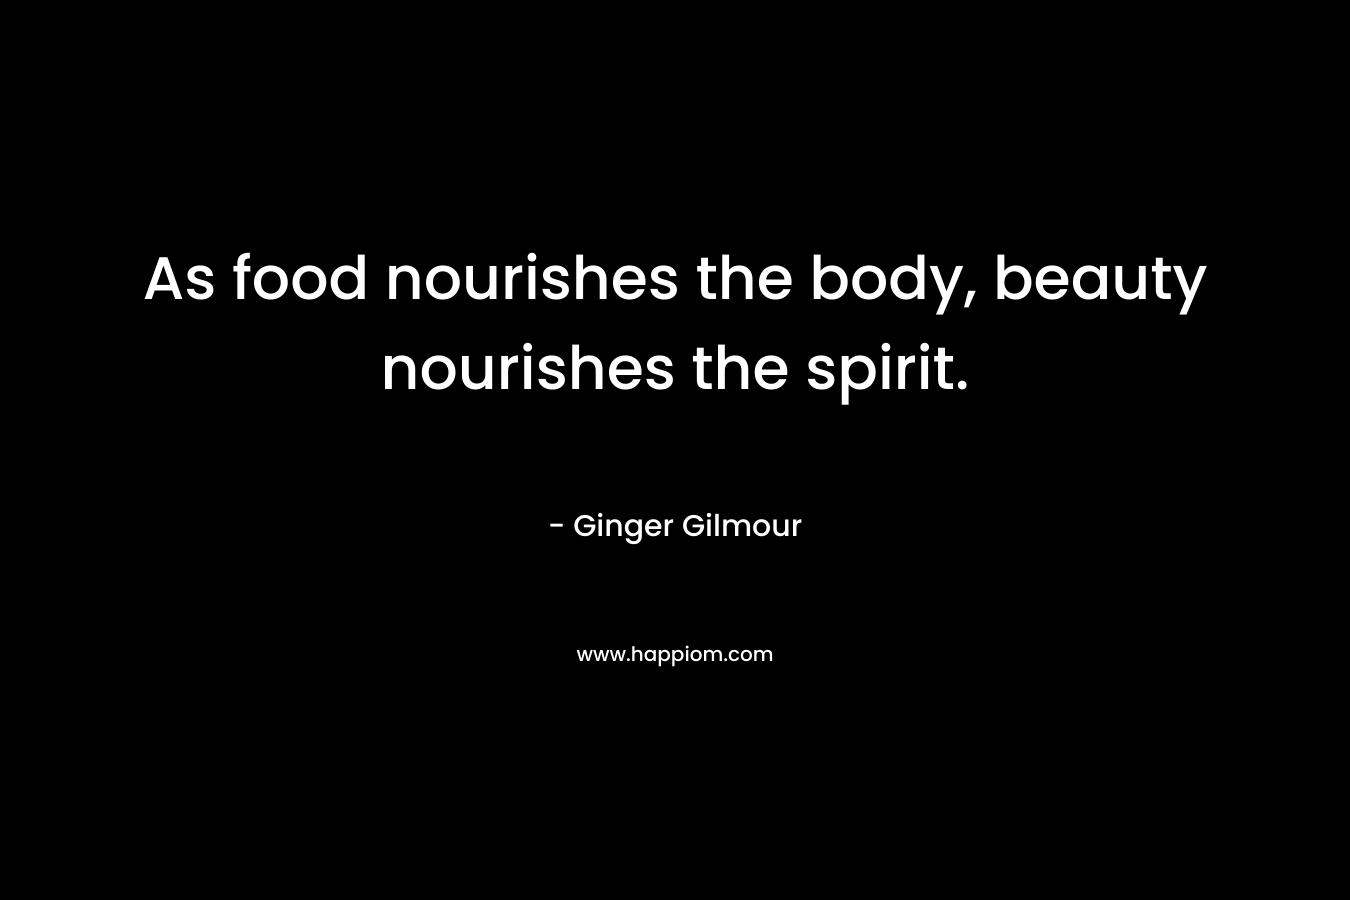 As food nourishes the body, beauty nourishes the spirit.